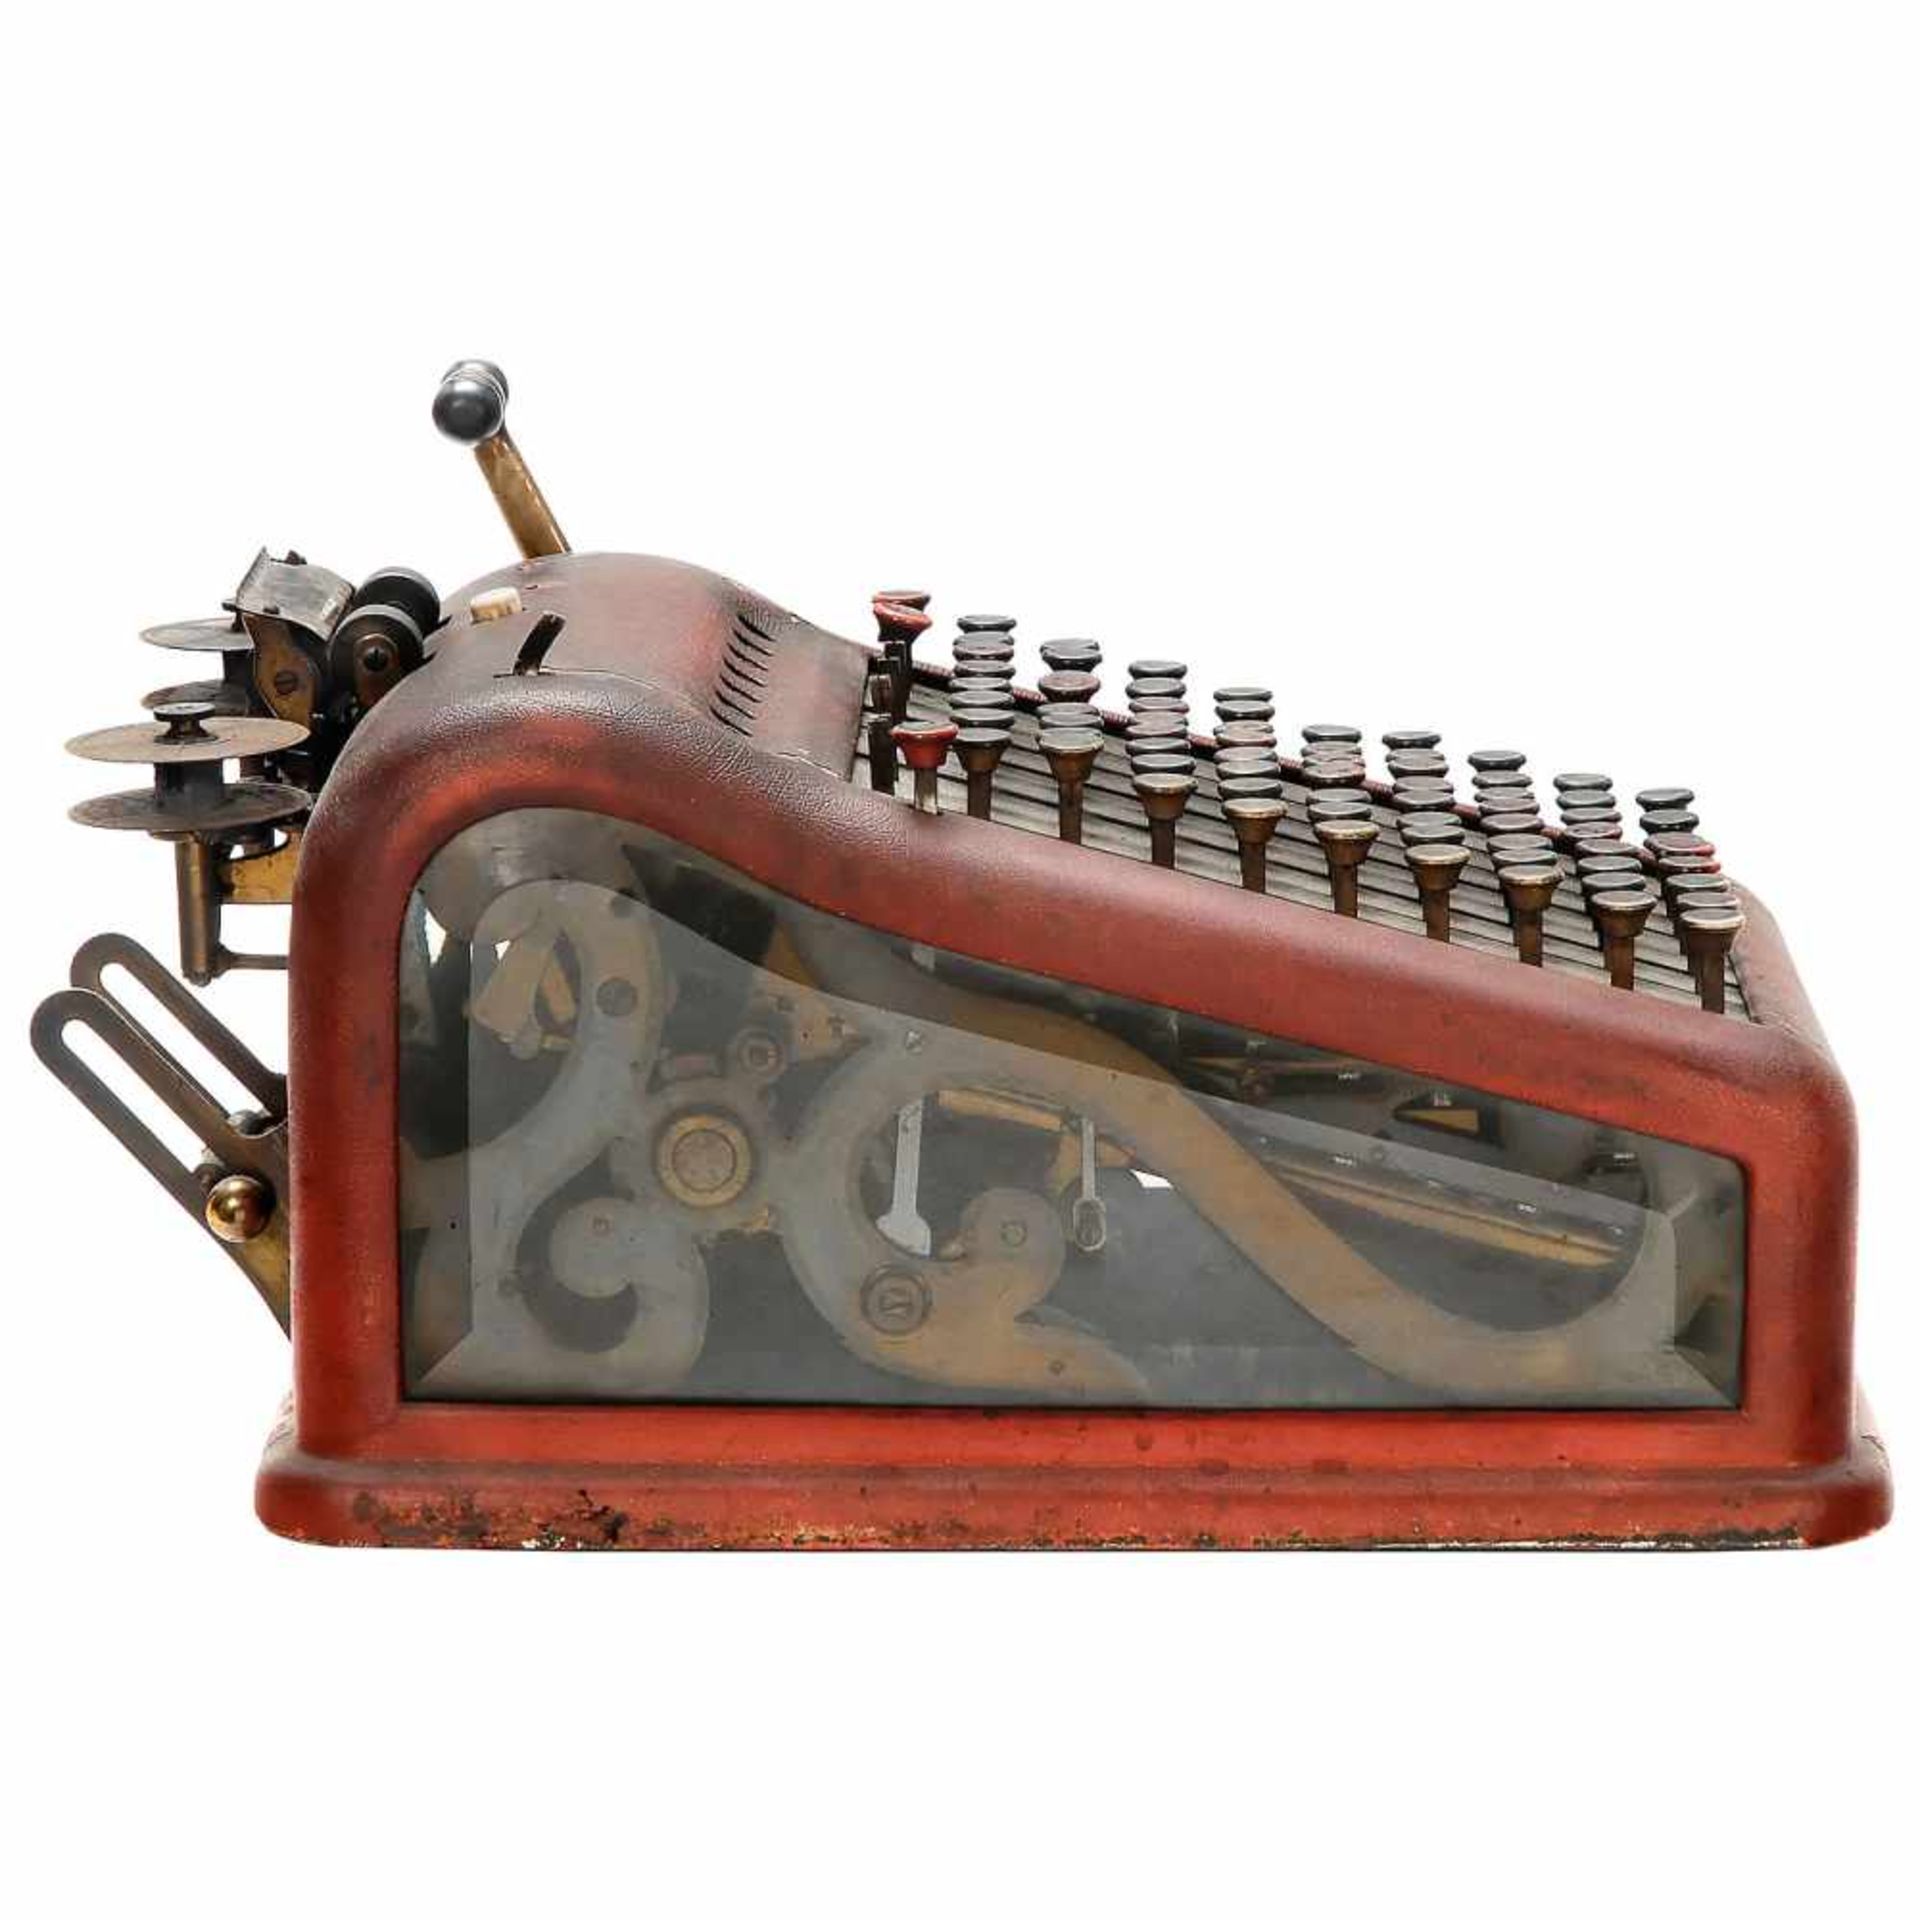 Prototype Laughlin Automatic Adding Machine, 1918Manufactured by the Automatic Bookkeeping - Bild 2 aus 2